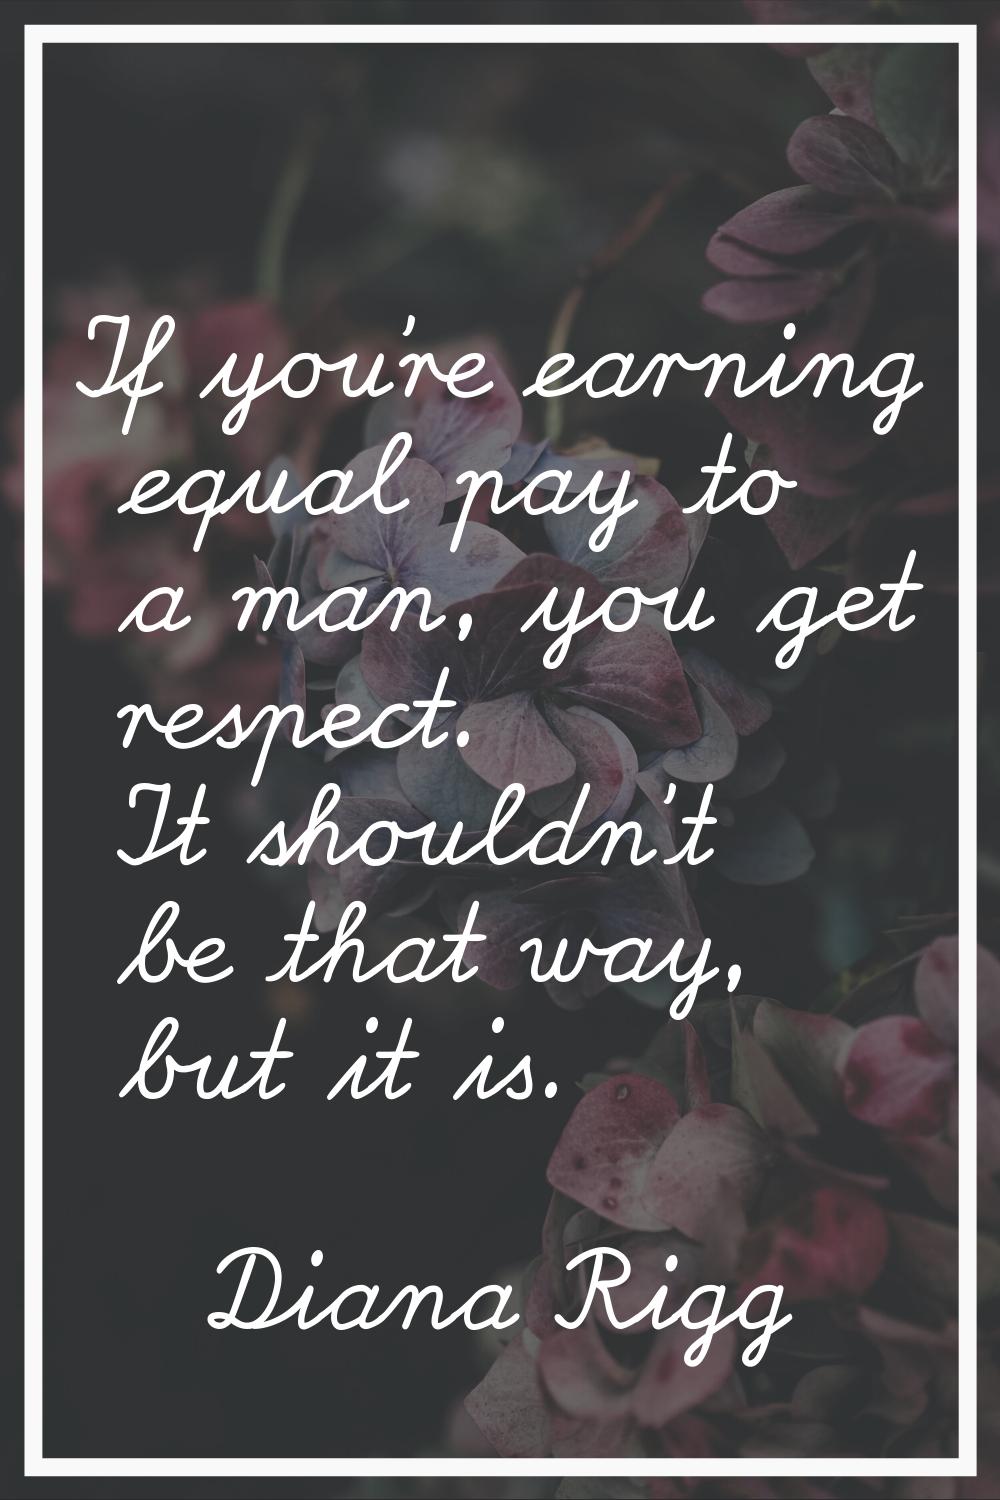 If you're earning equal pay to a man, you get respect. It shouldn't be that way, but it is.